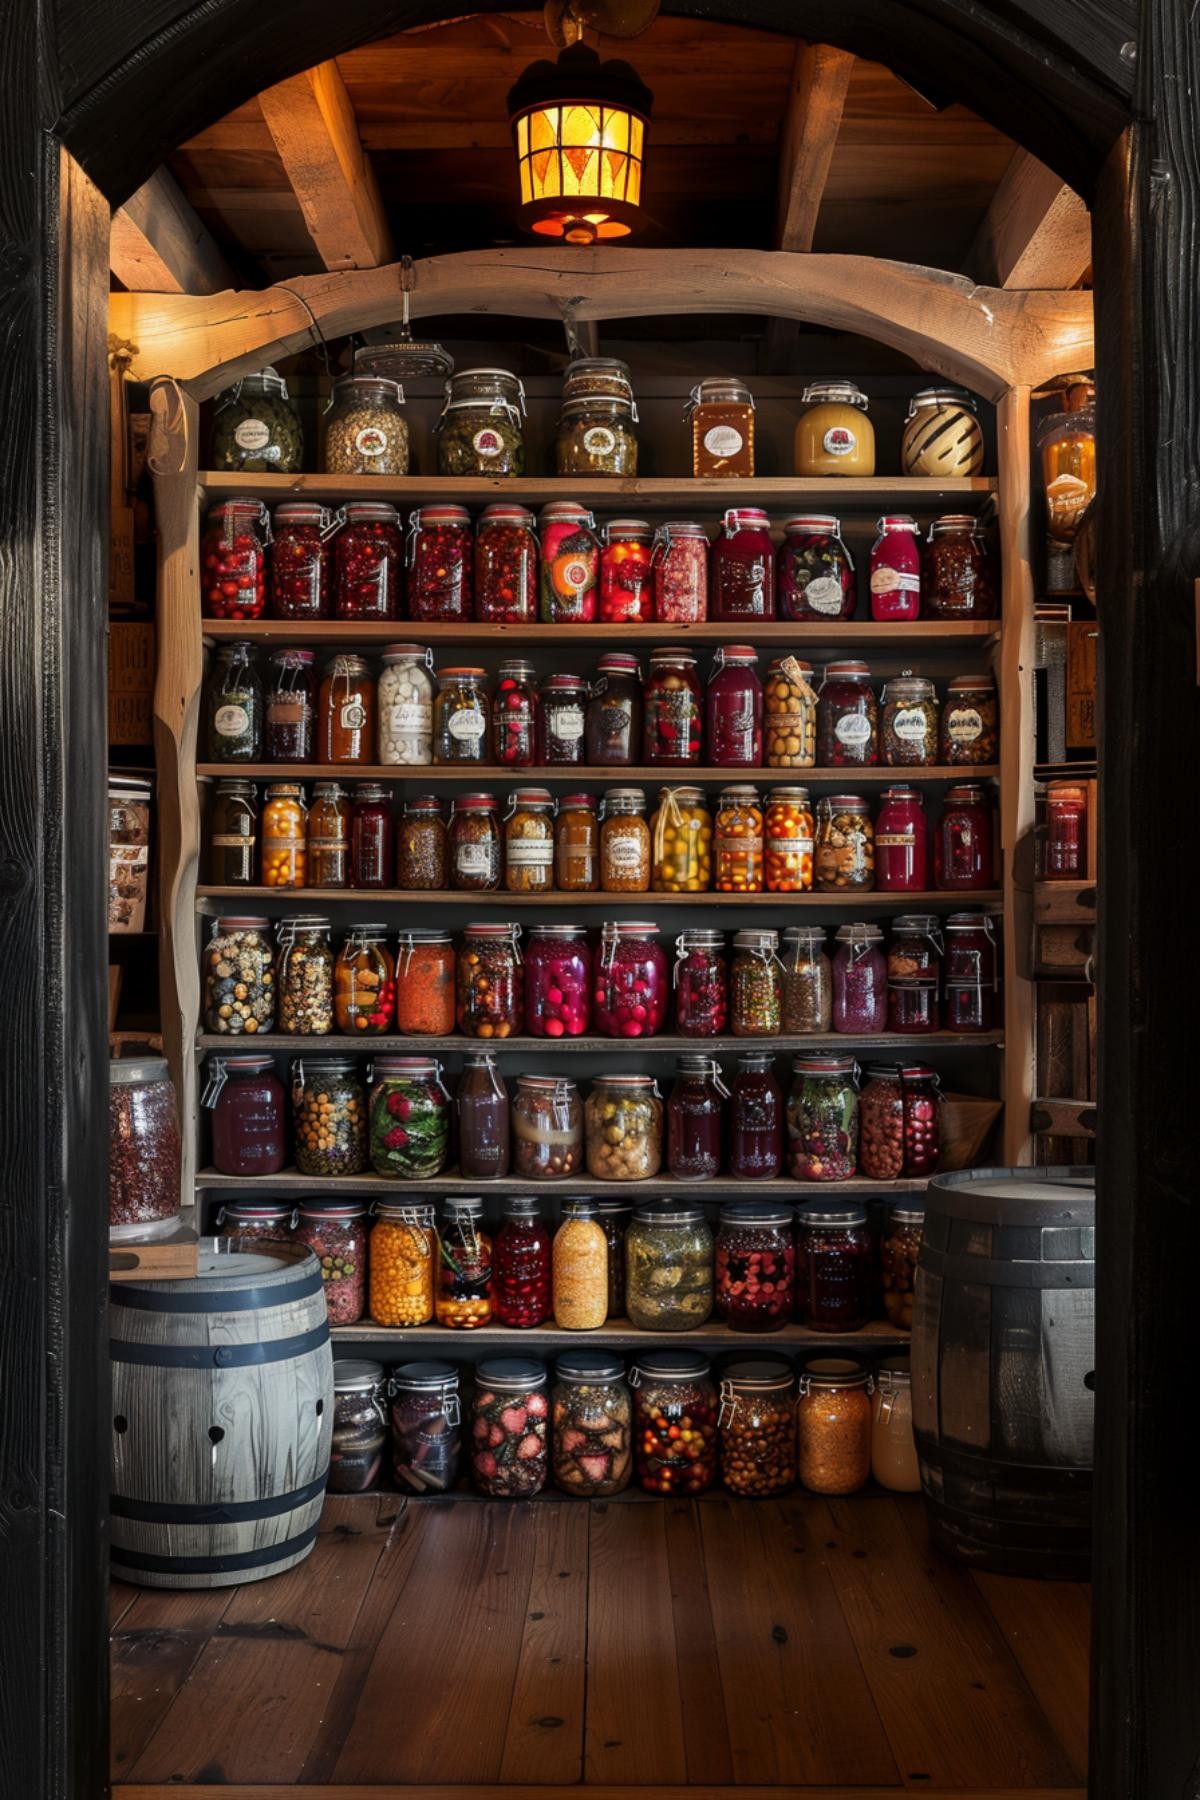 Pretty-as-a-Picture Pantry